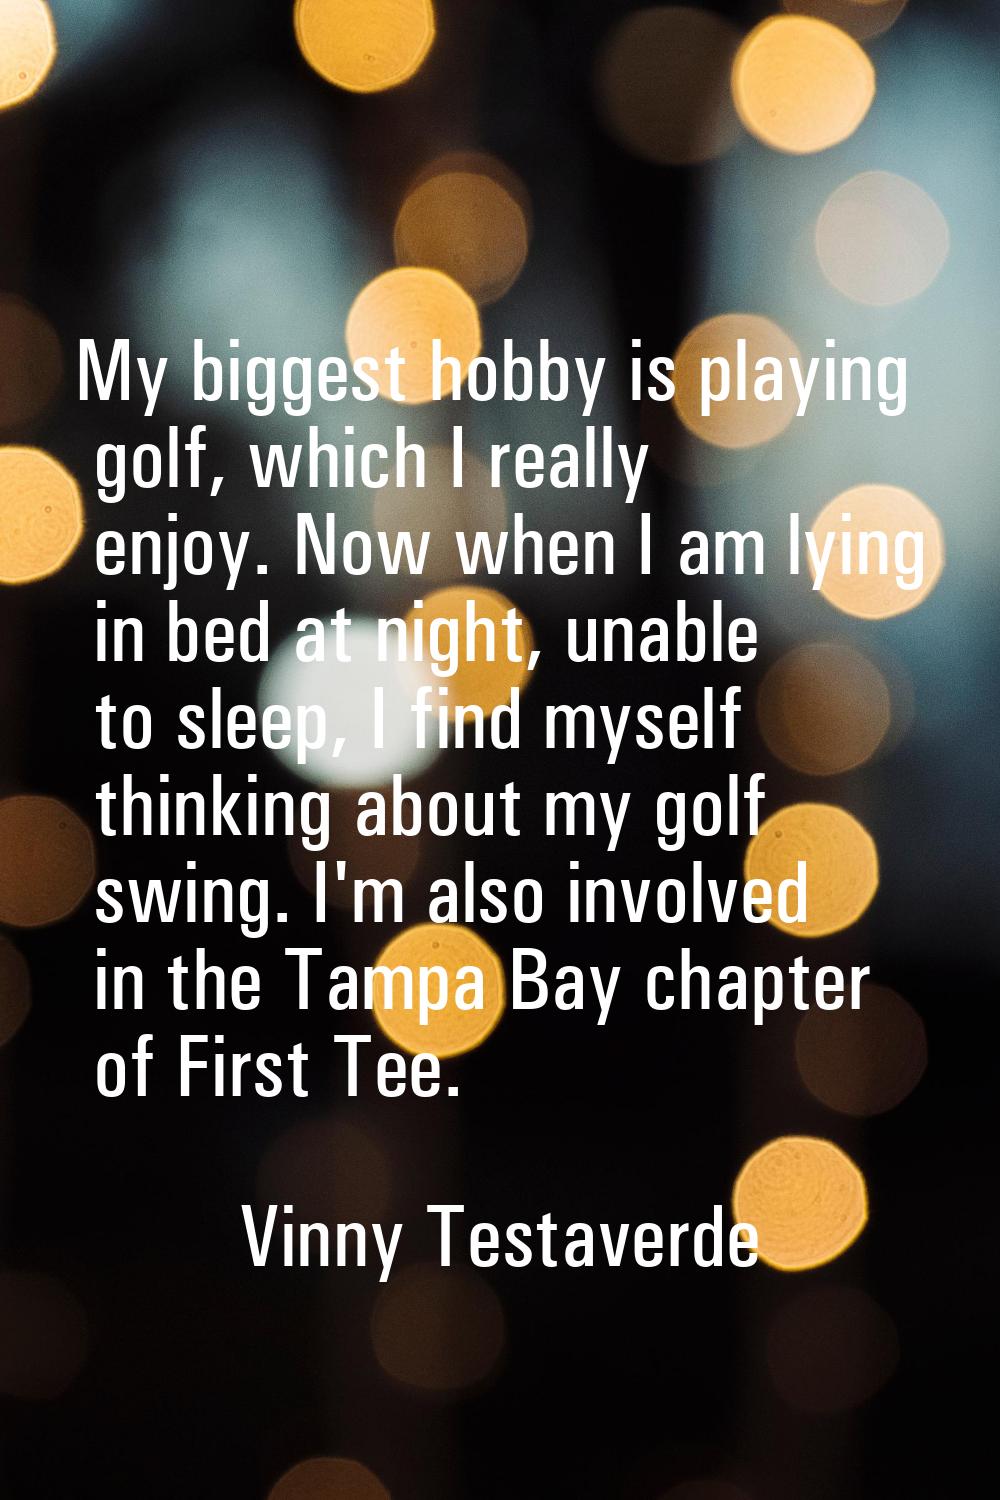 My biggest hobby is playing golf, which I really enjoy. Now when I am lying in bed at night, unable